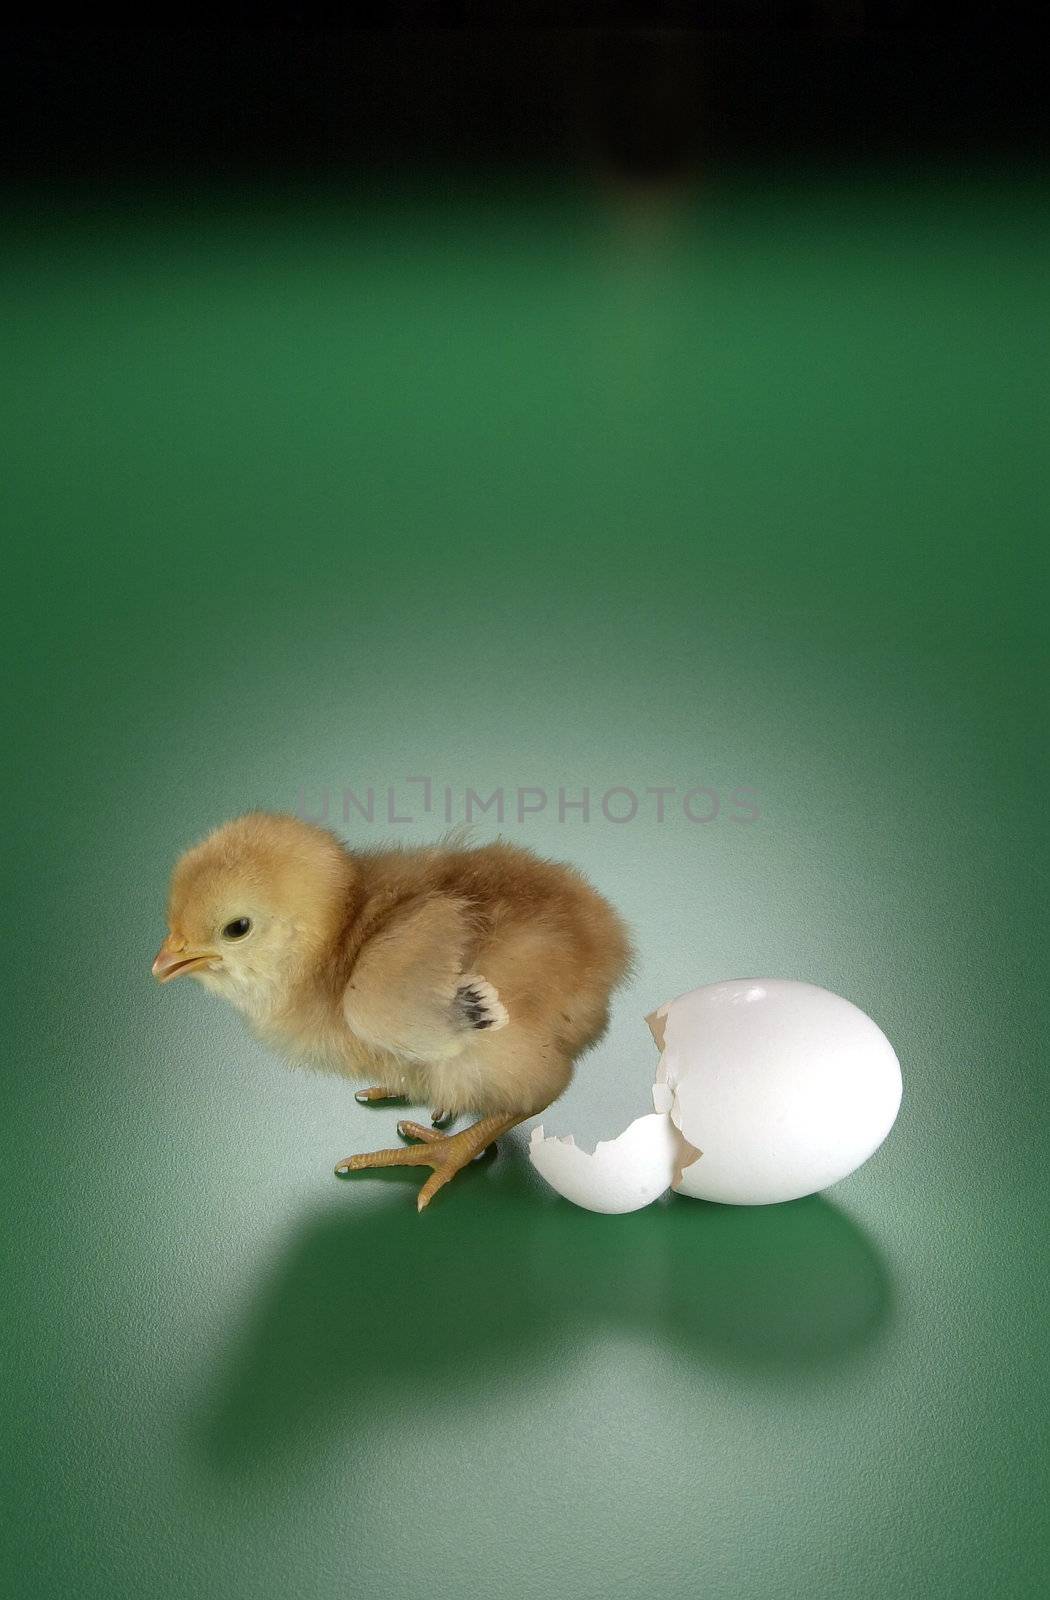 Chicken and egg shell by f/2sumicron